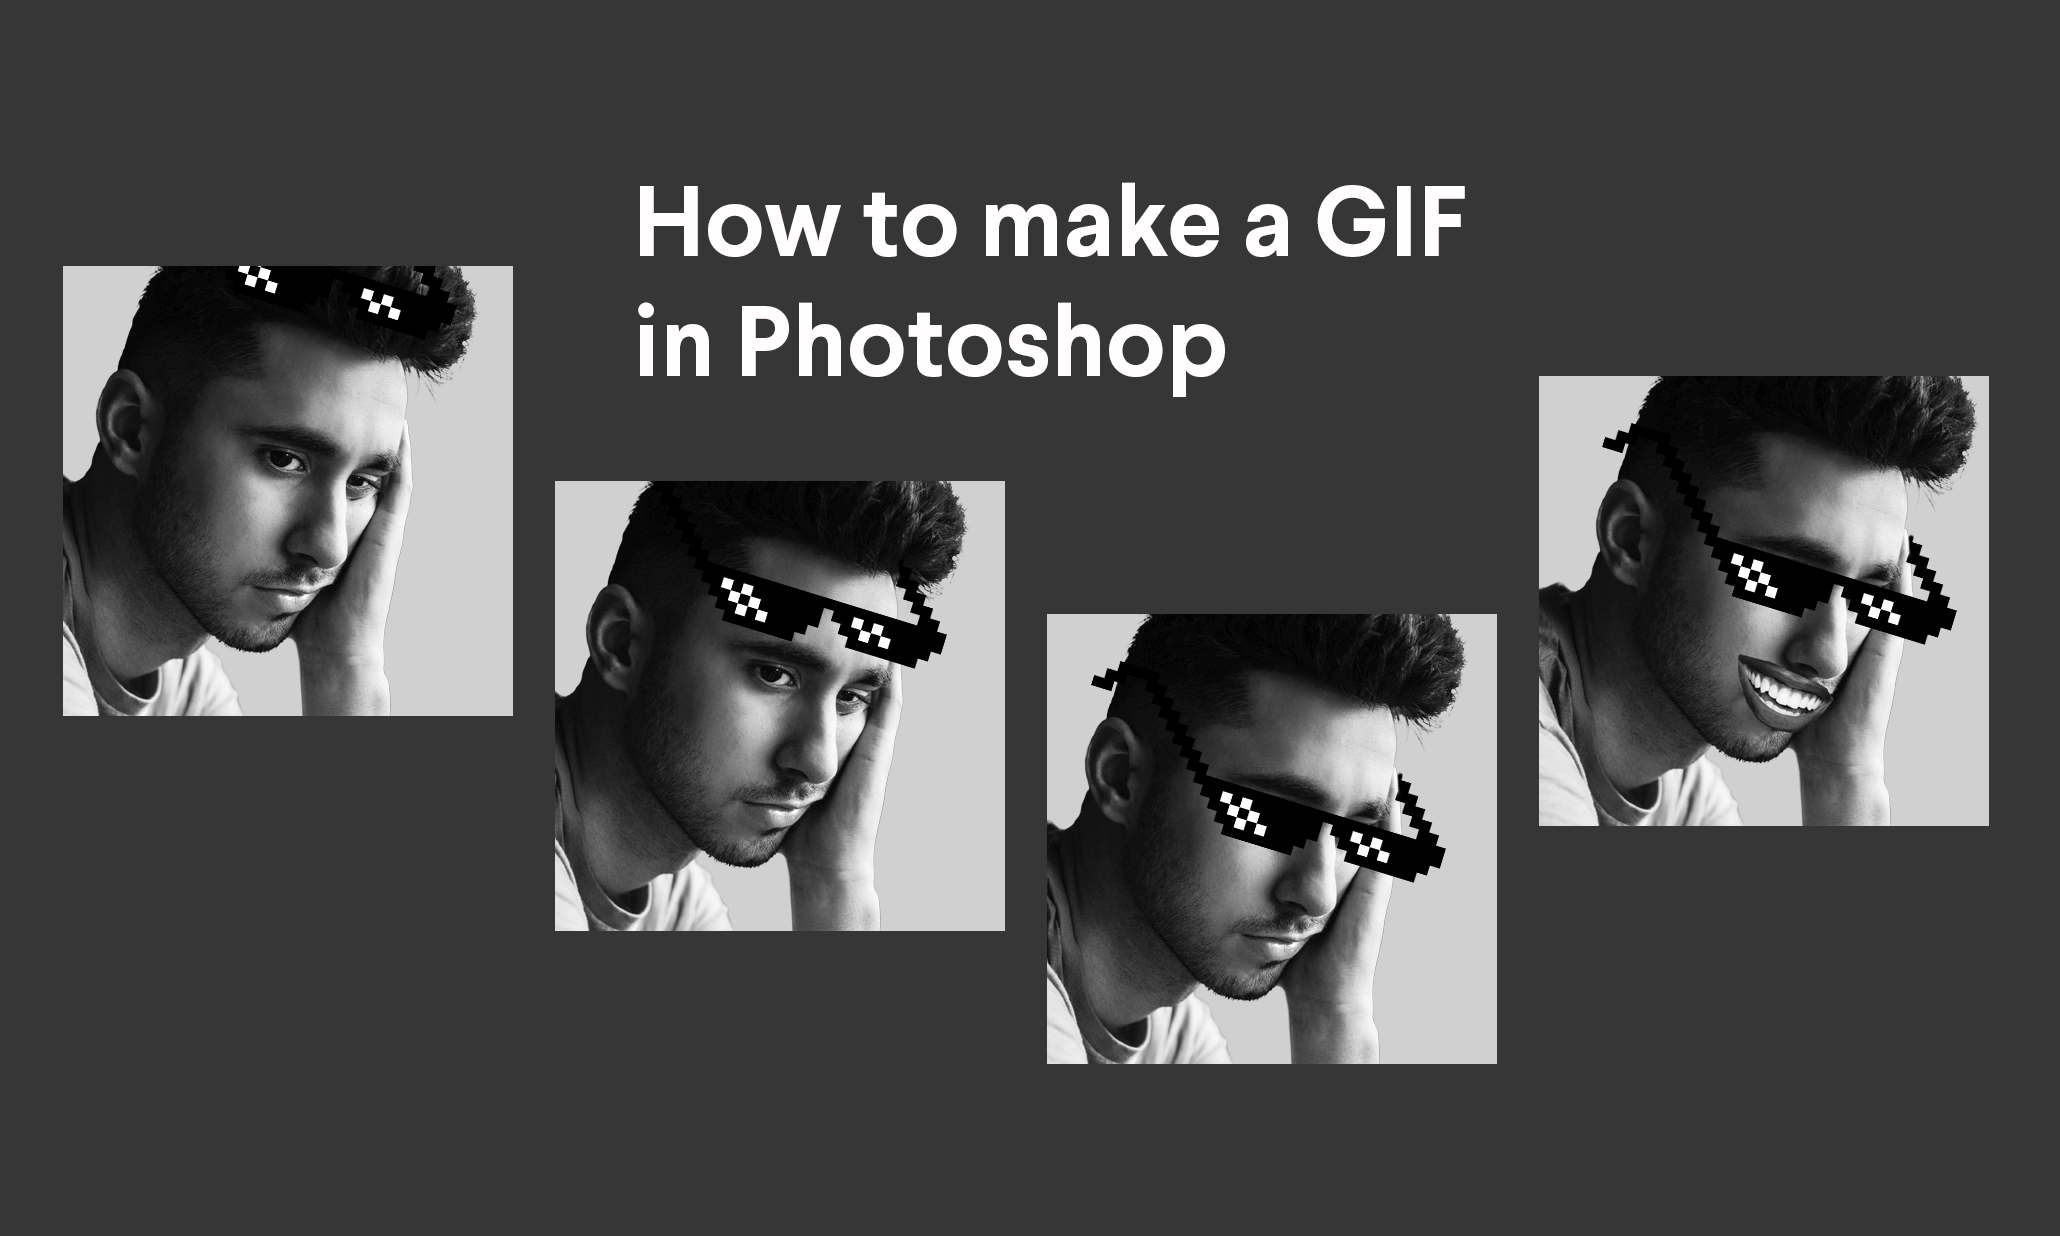 How to create a GIF using photoshop